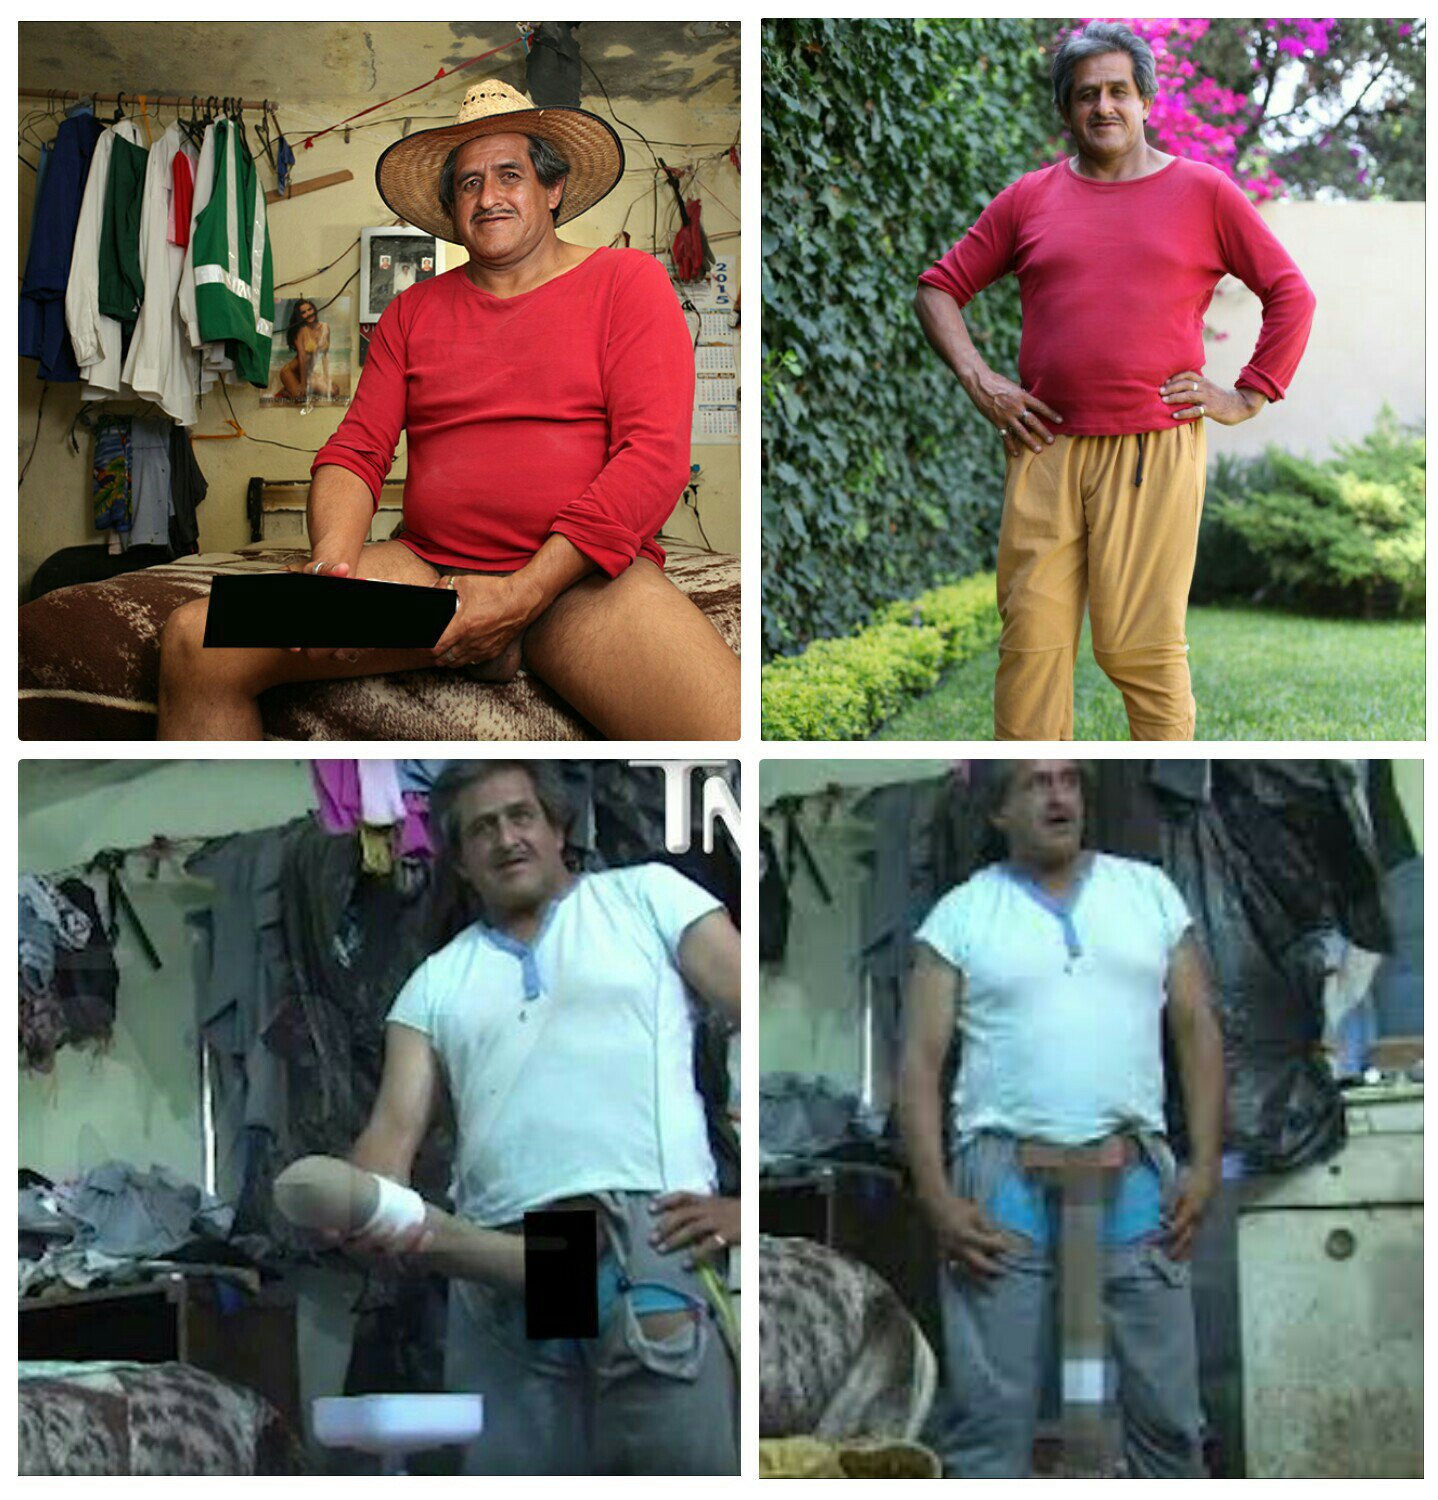 Typisch musicus Verschrikkelijk Twitter 上的GIDI：""@Plentygist: A Mexican, Roberto Esquivel Cabrera, 54, with  world record 19-inches penis, can't find work because he can't fit into  work uniforms. Photos @Gidi_Traffic #GIDITRAFFIC https://t.co/LGeP93HN3t" /  Twitter